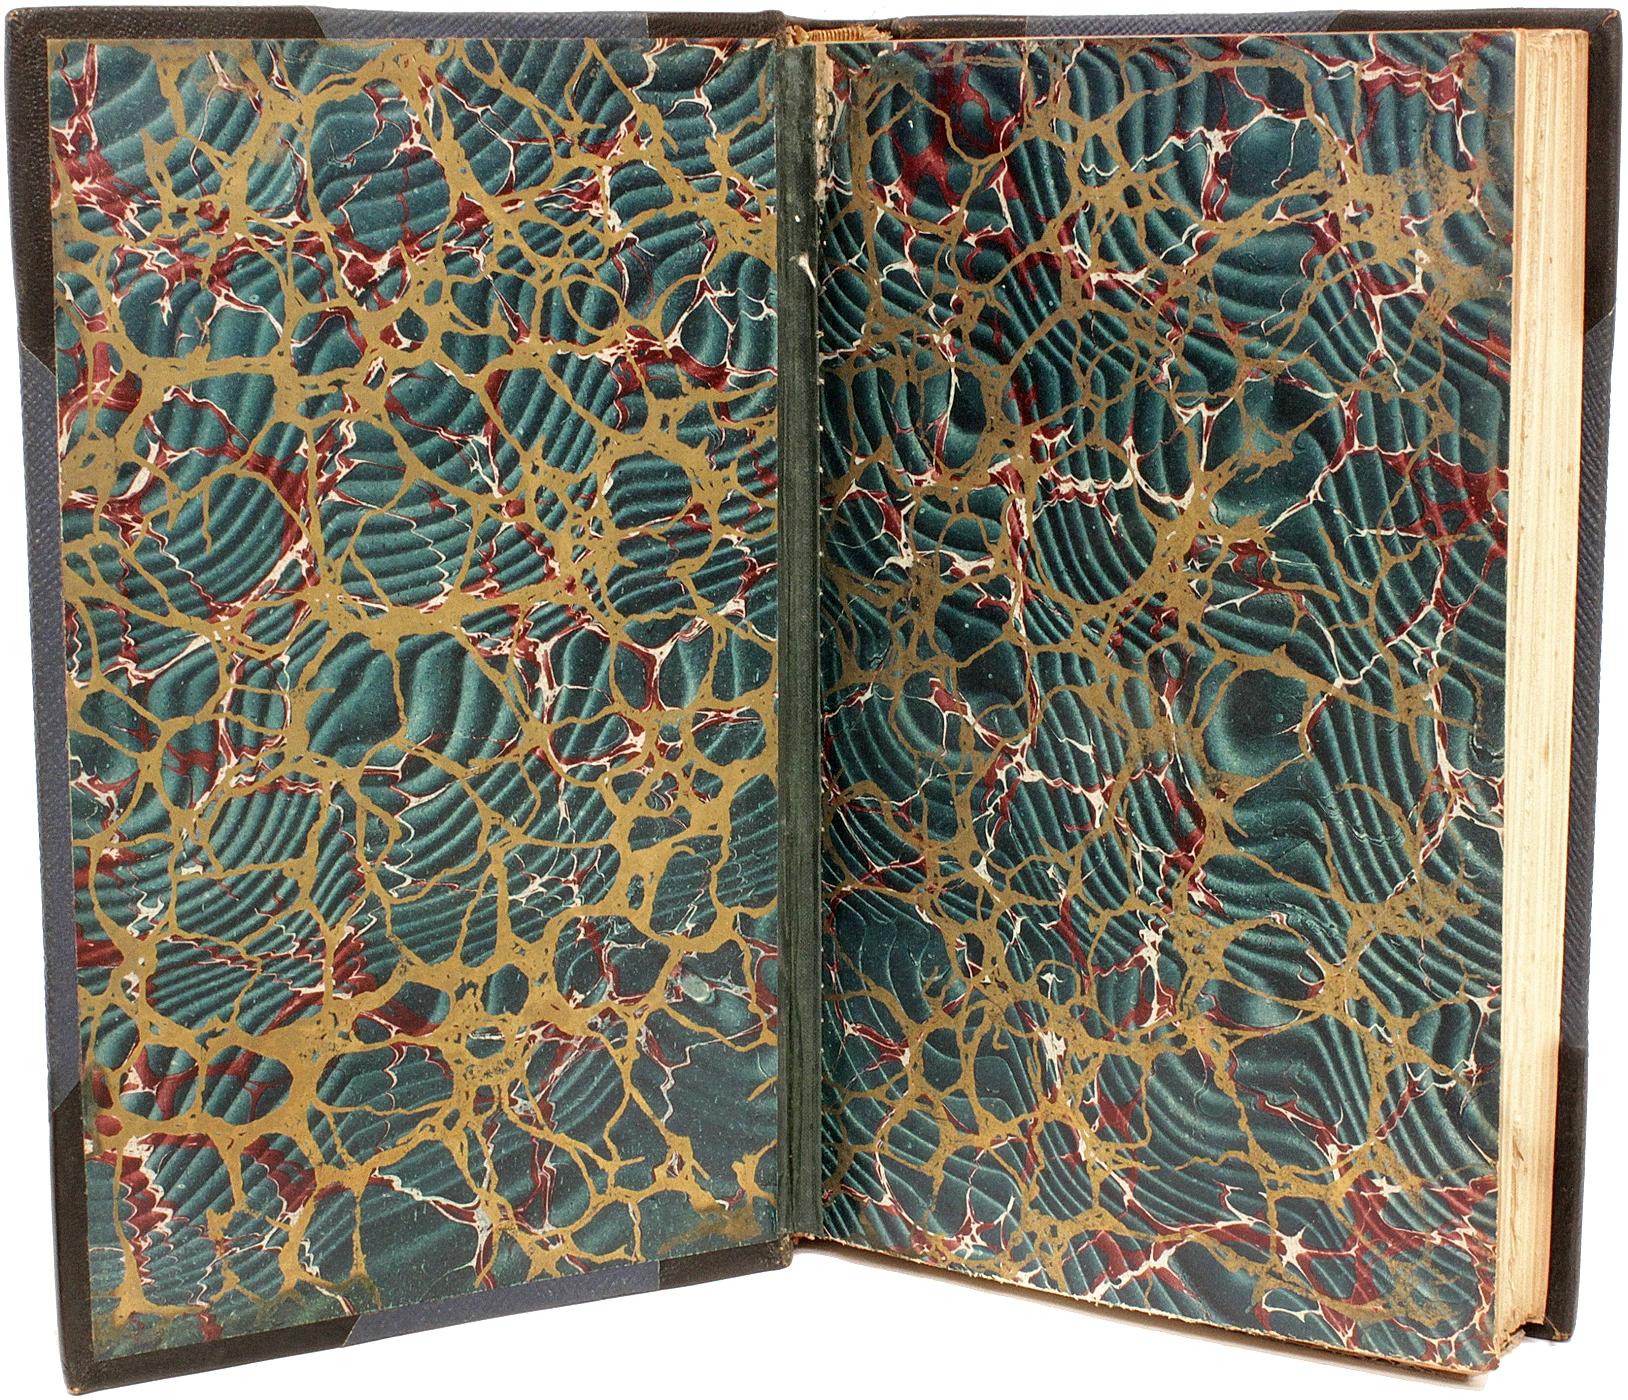 Richard BURTON. The Book Of The Thousand Nights. 12 vols. 1897 IN A FINE BINDING For Sale 3